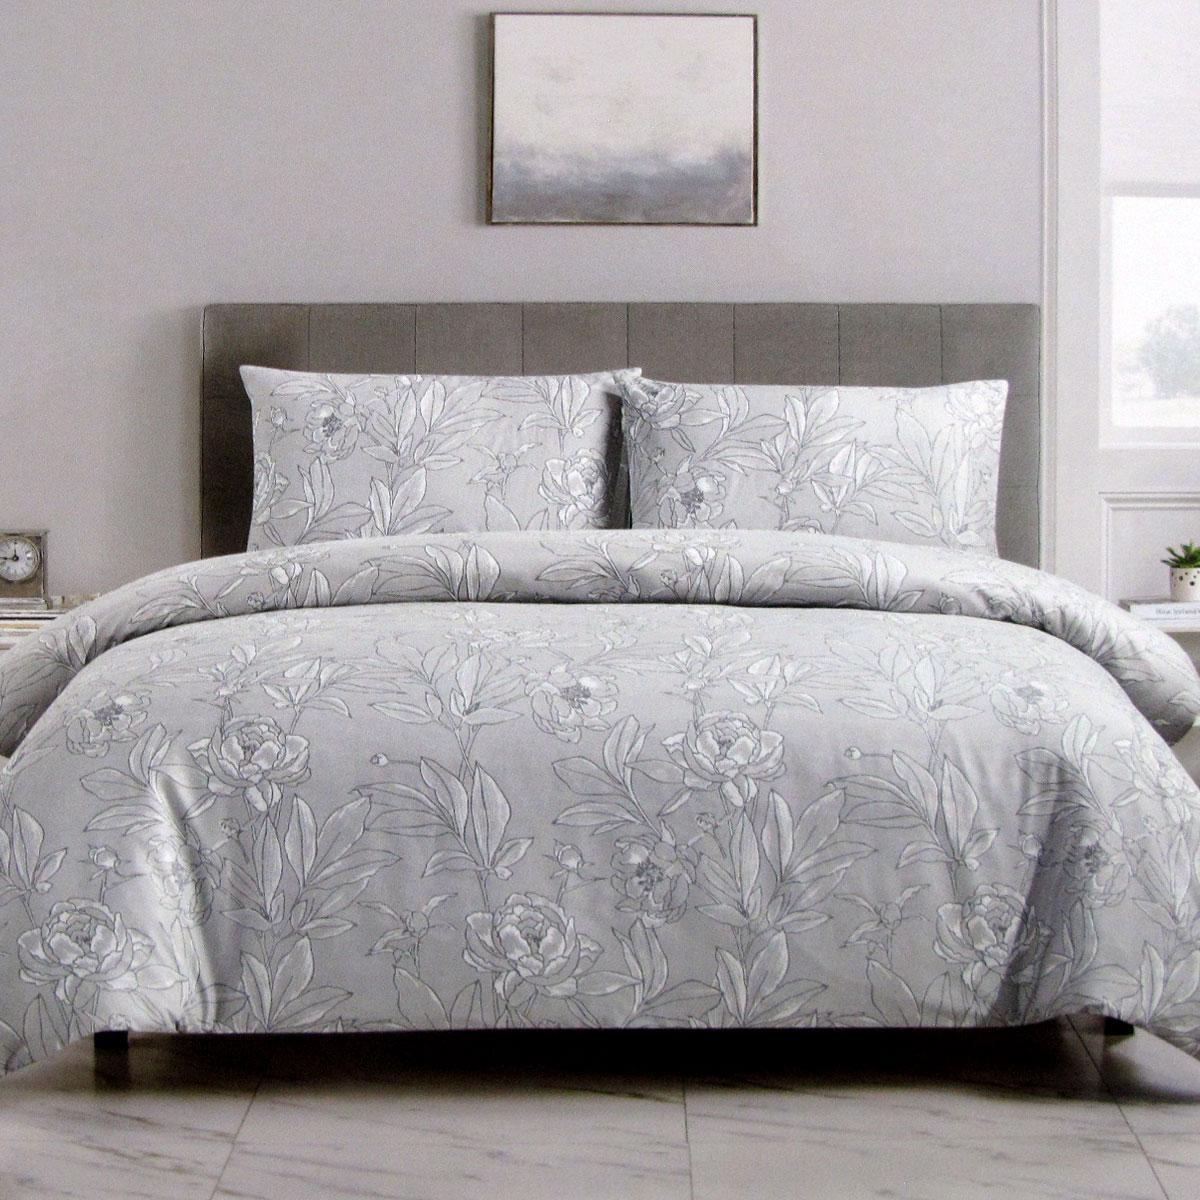 Artex Silver Peony Floral Printed Microfiber Polyester Quilt Cover Set Single